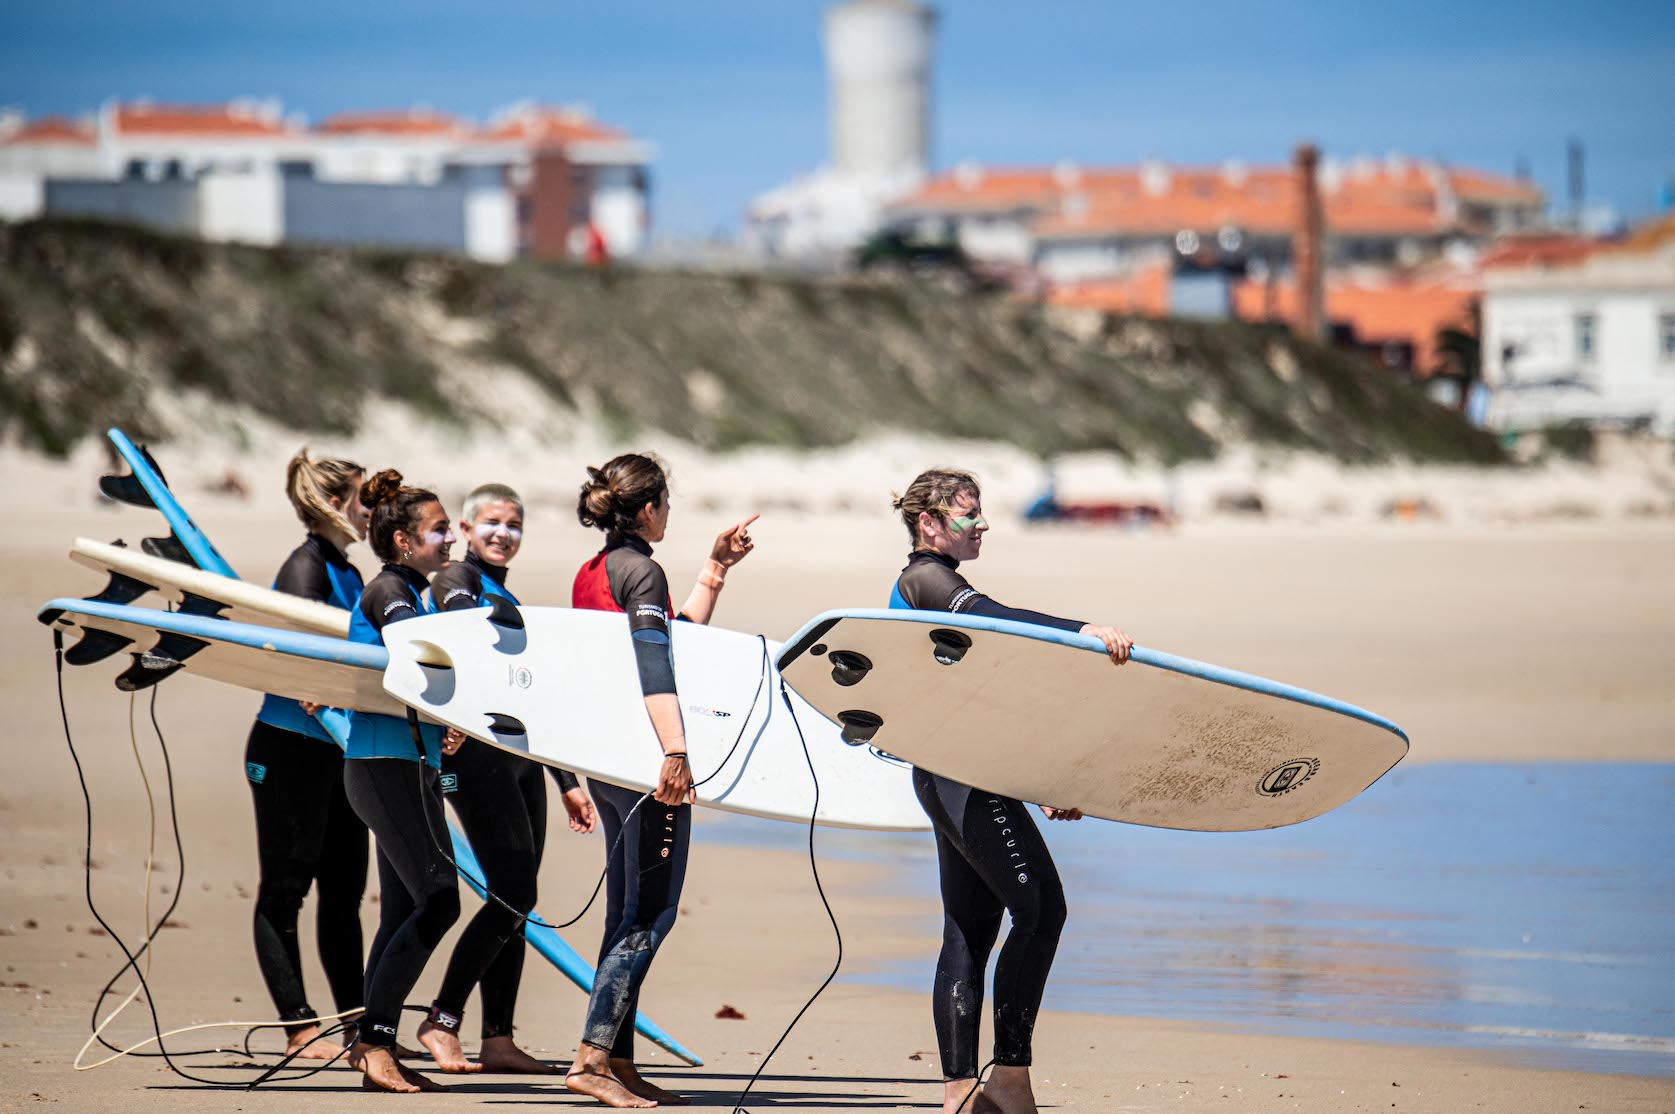 Surf coaching and mental training on the beach